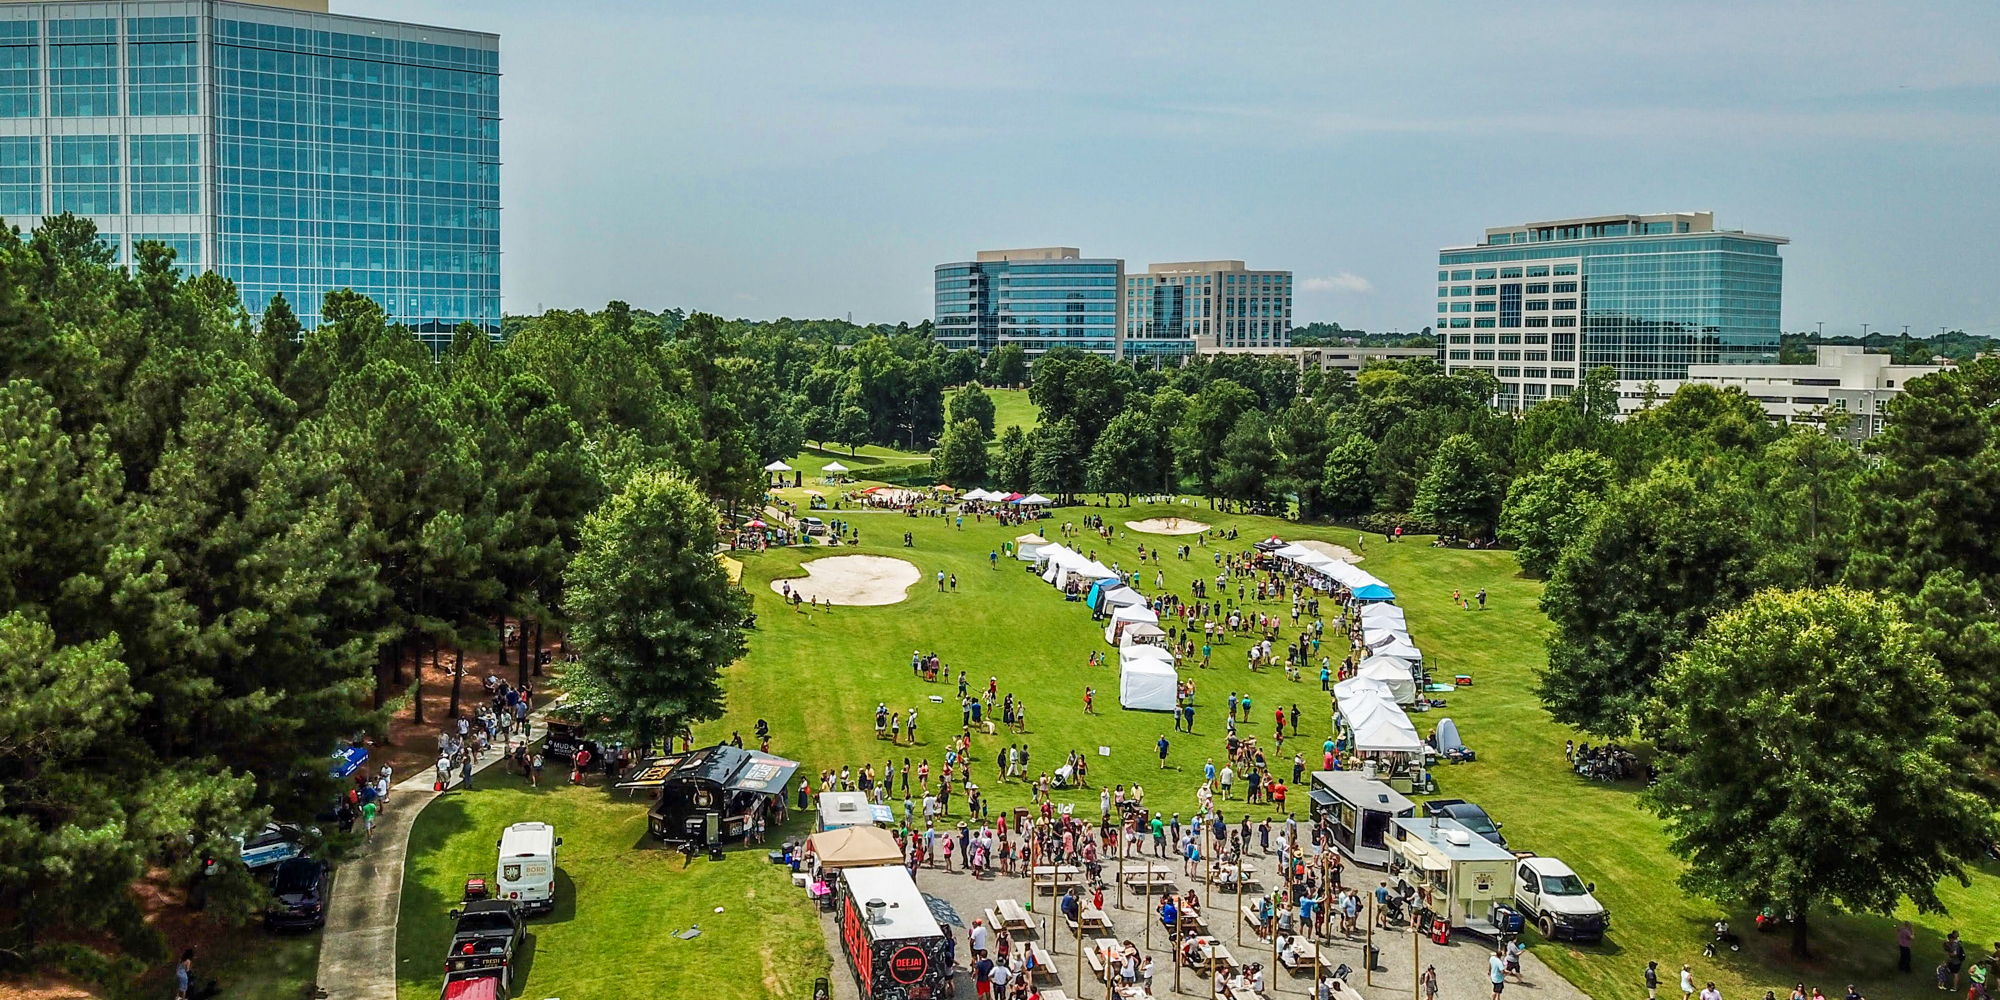 Markets at 11 Fall Fest - Outdoor Market in Ballantyne promotional image